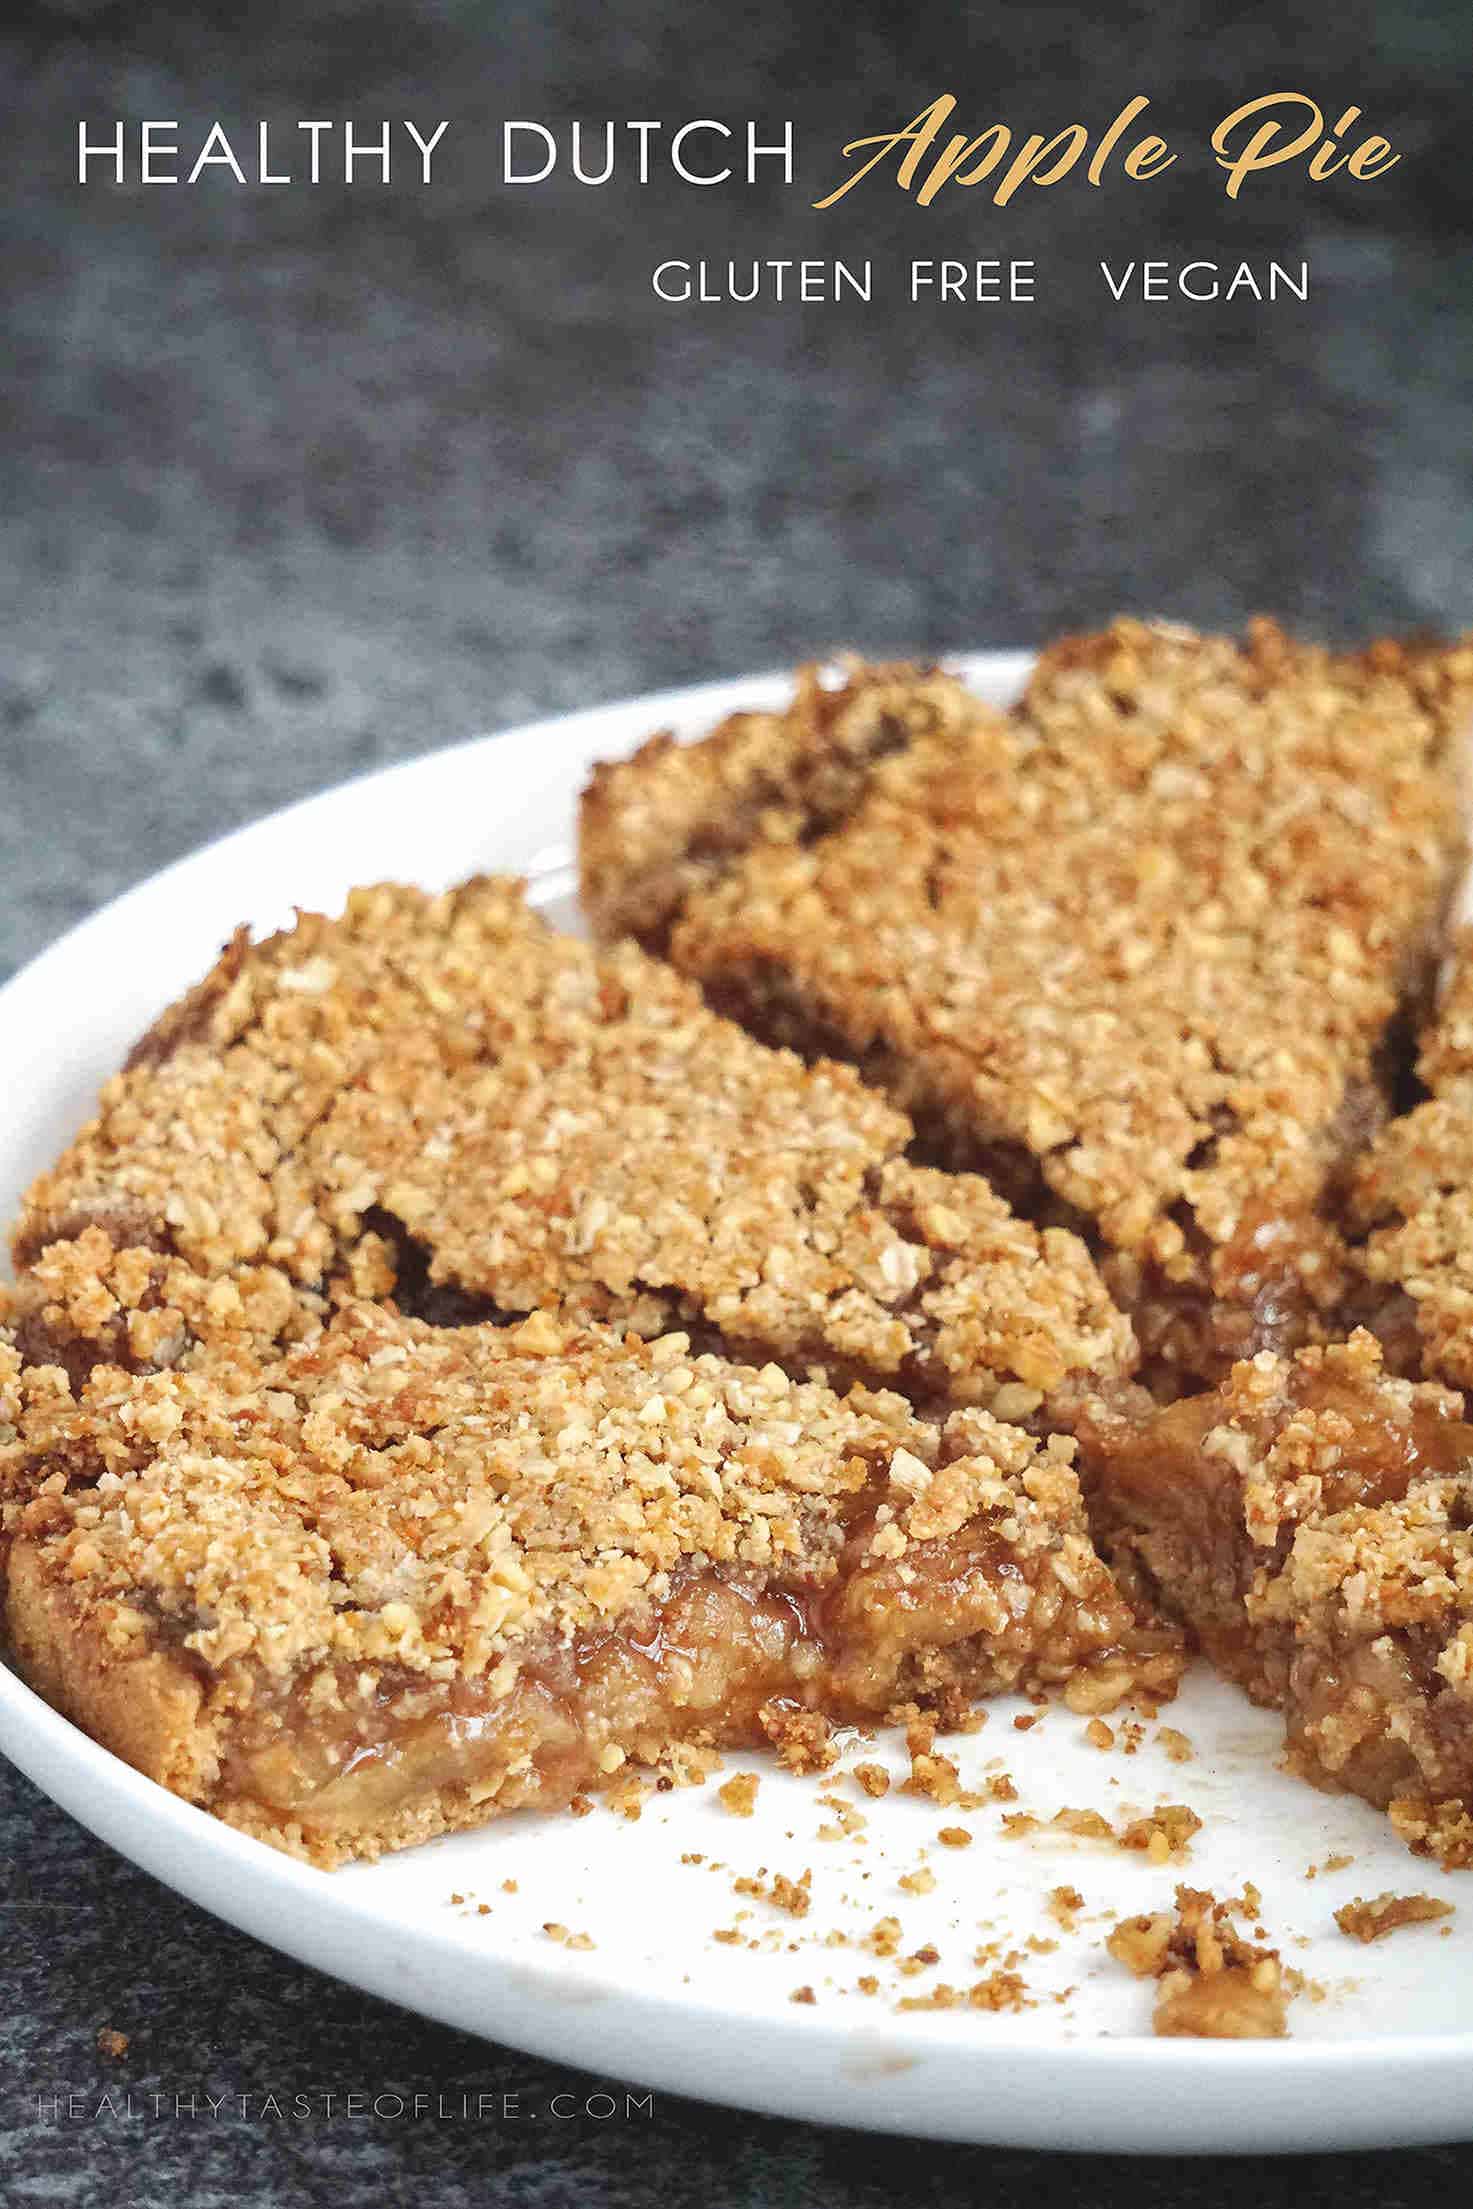 This healthy easy gluten free vegan apple pie is made with a vegan gluten free pie crust filled with apples and a crunchy oat crumble topping. Serve for holidays and Thanksgiving table.